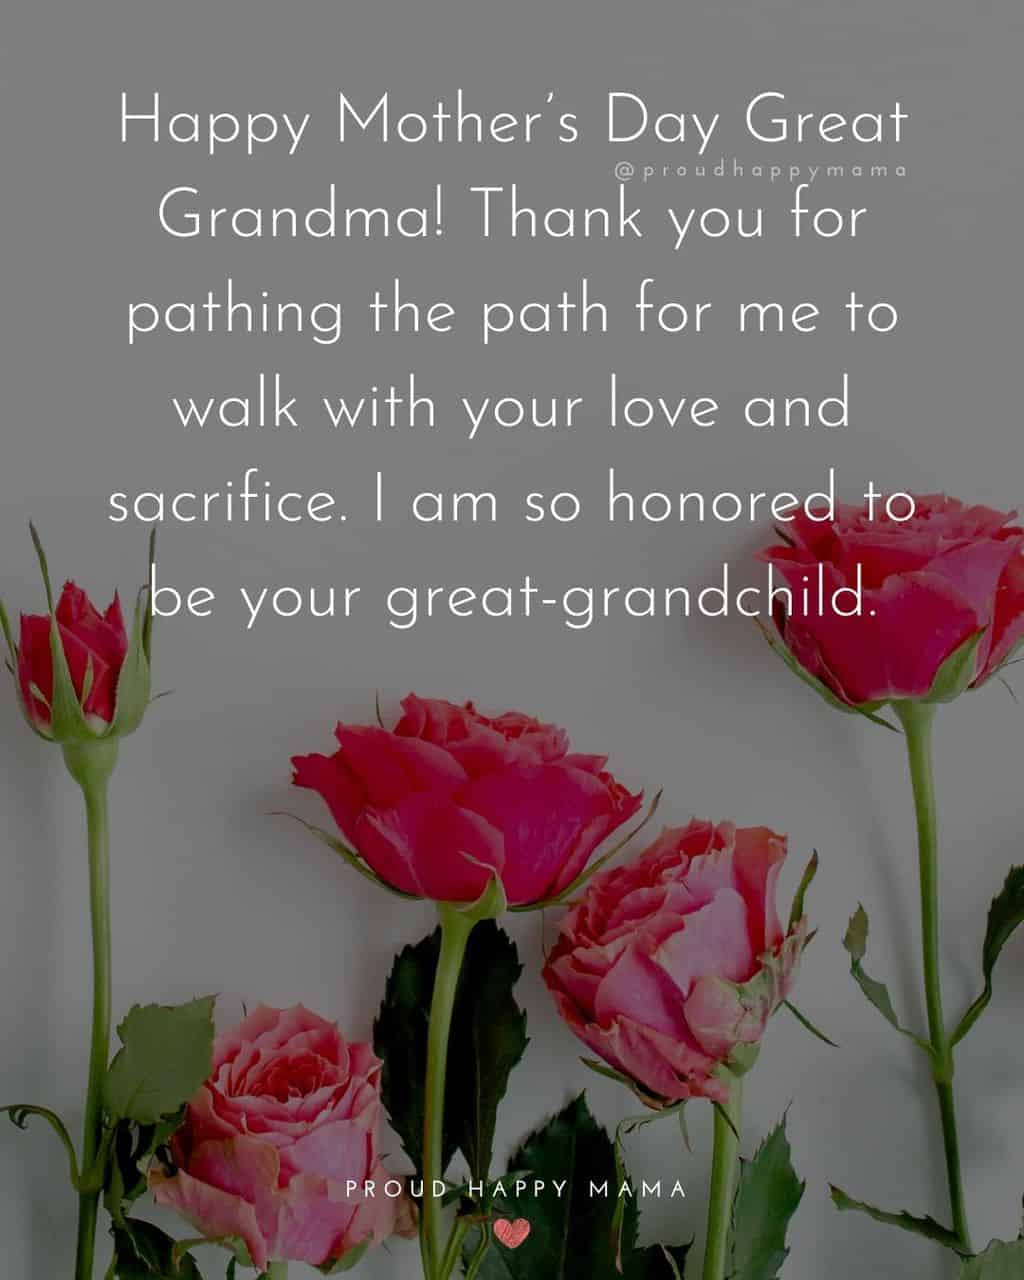 Happy Mothers Day Quotes To Grandma - Happy Mother’s Day Great Grandma! Thank you for pathing the path for me to walk